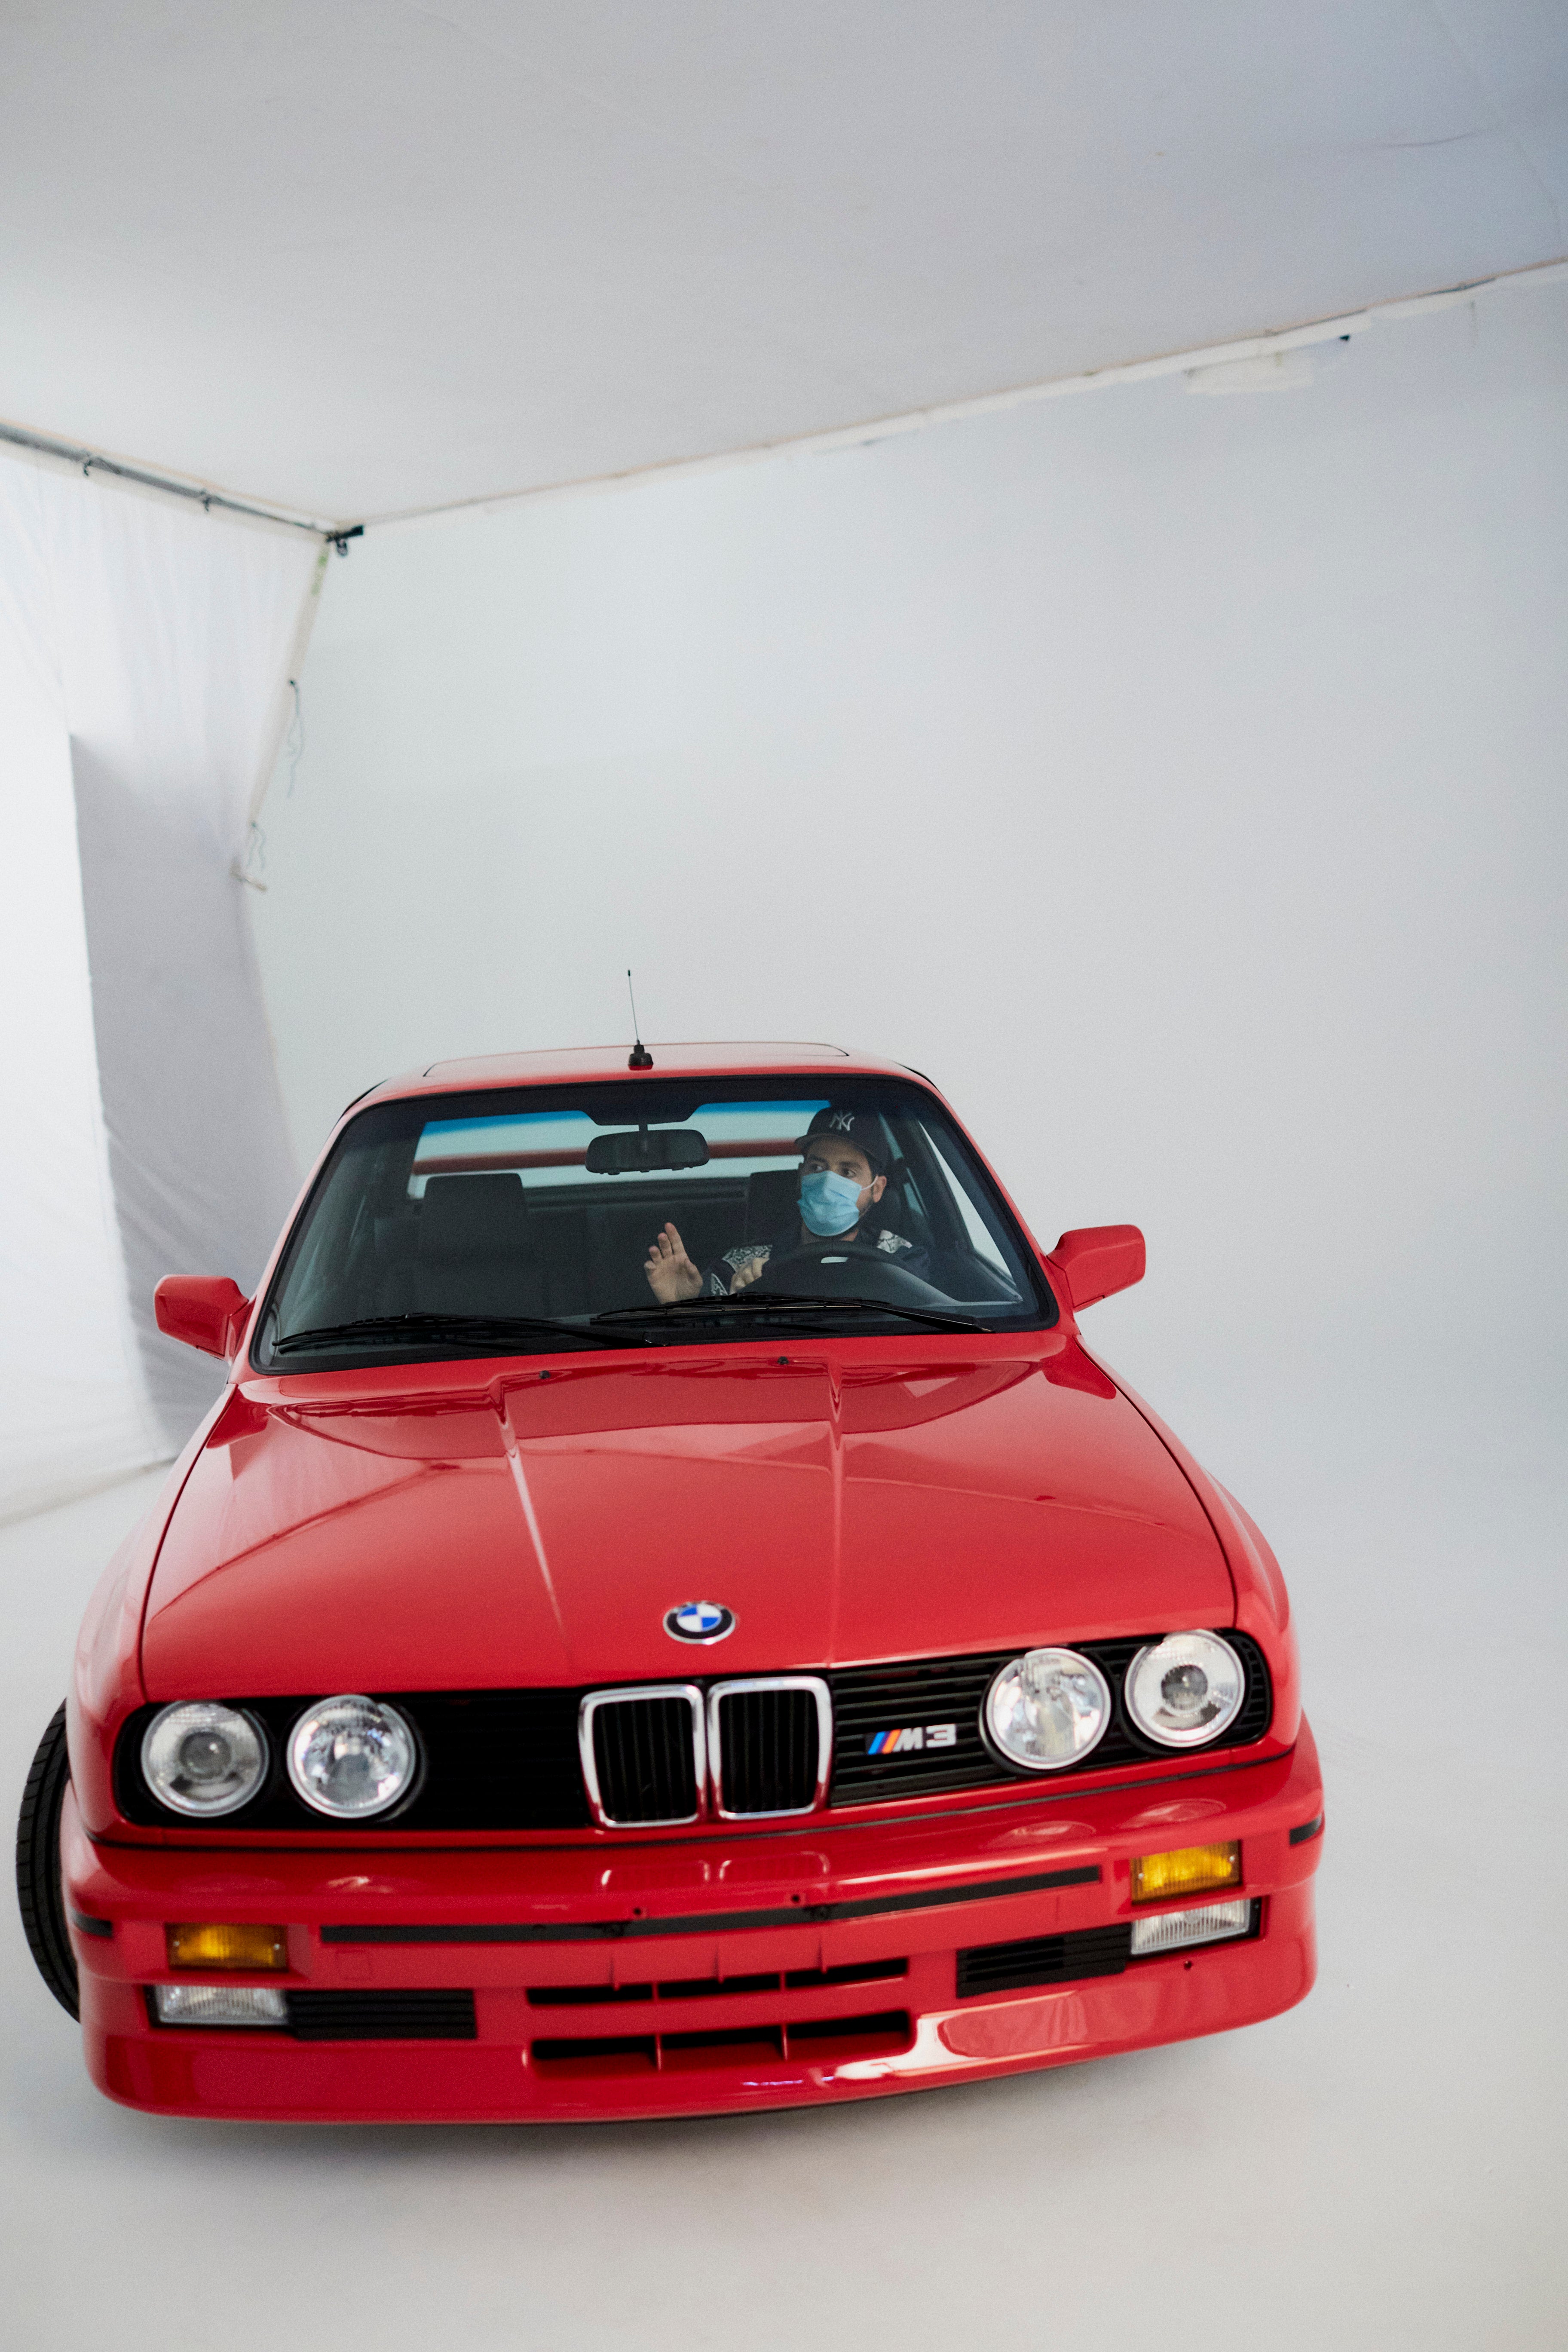 journals/kith-for-bmw-2020-90